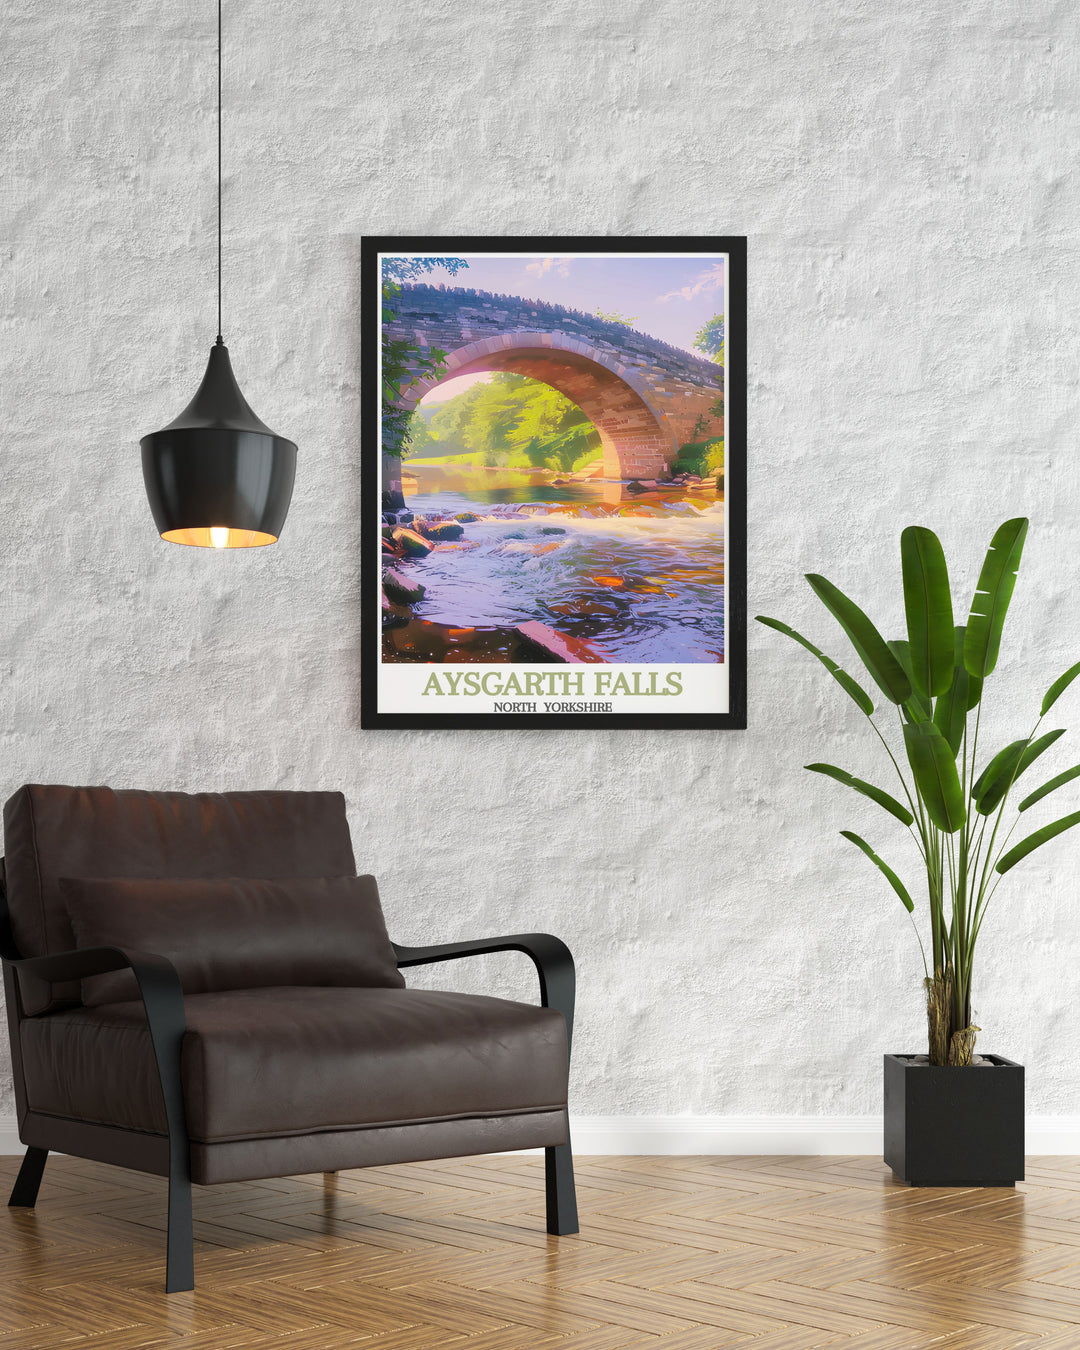 National Park poster of Aysgarth Bridge in the Yorkshire Dales capturing the essence of North Yorkshires scenic beauty this print is ideal for those who appreciate vintage travel art and want to bring a piece of the countryside into their home.